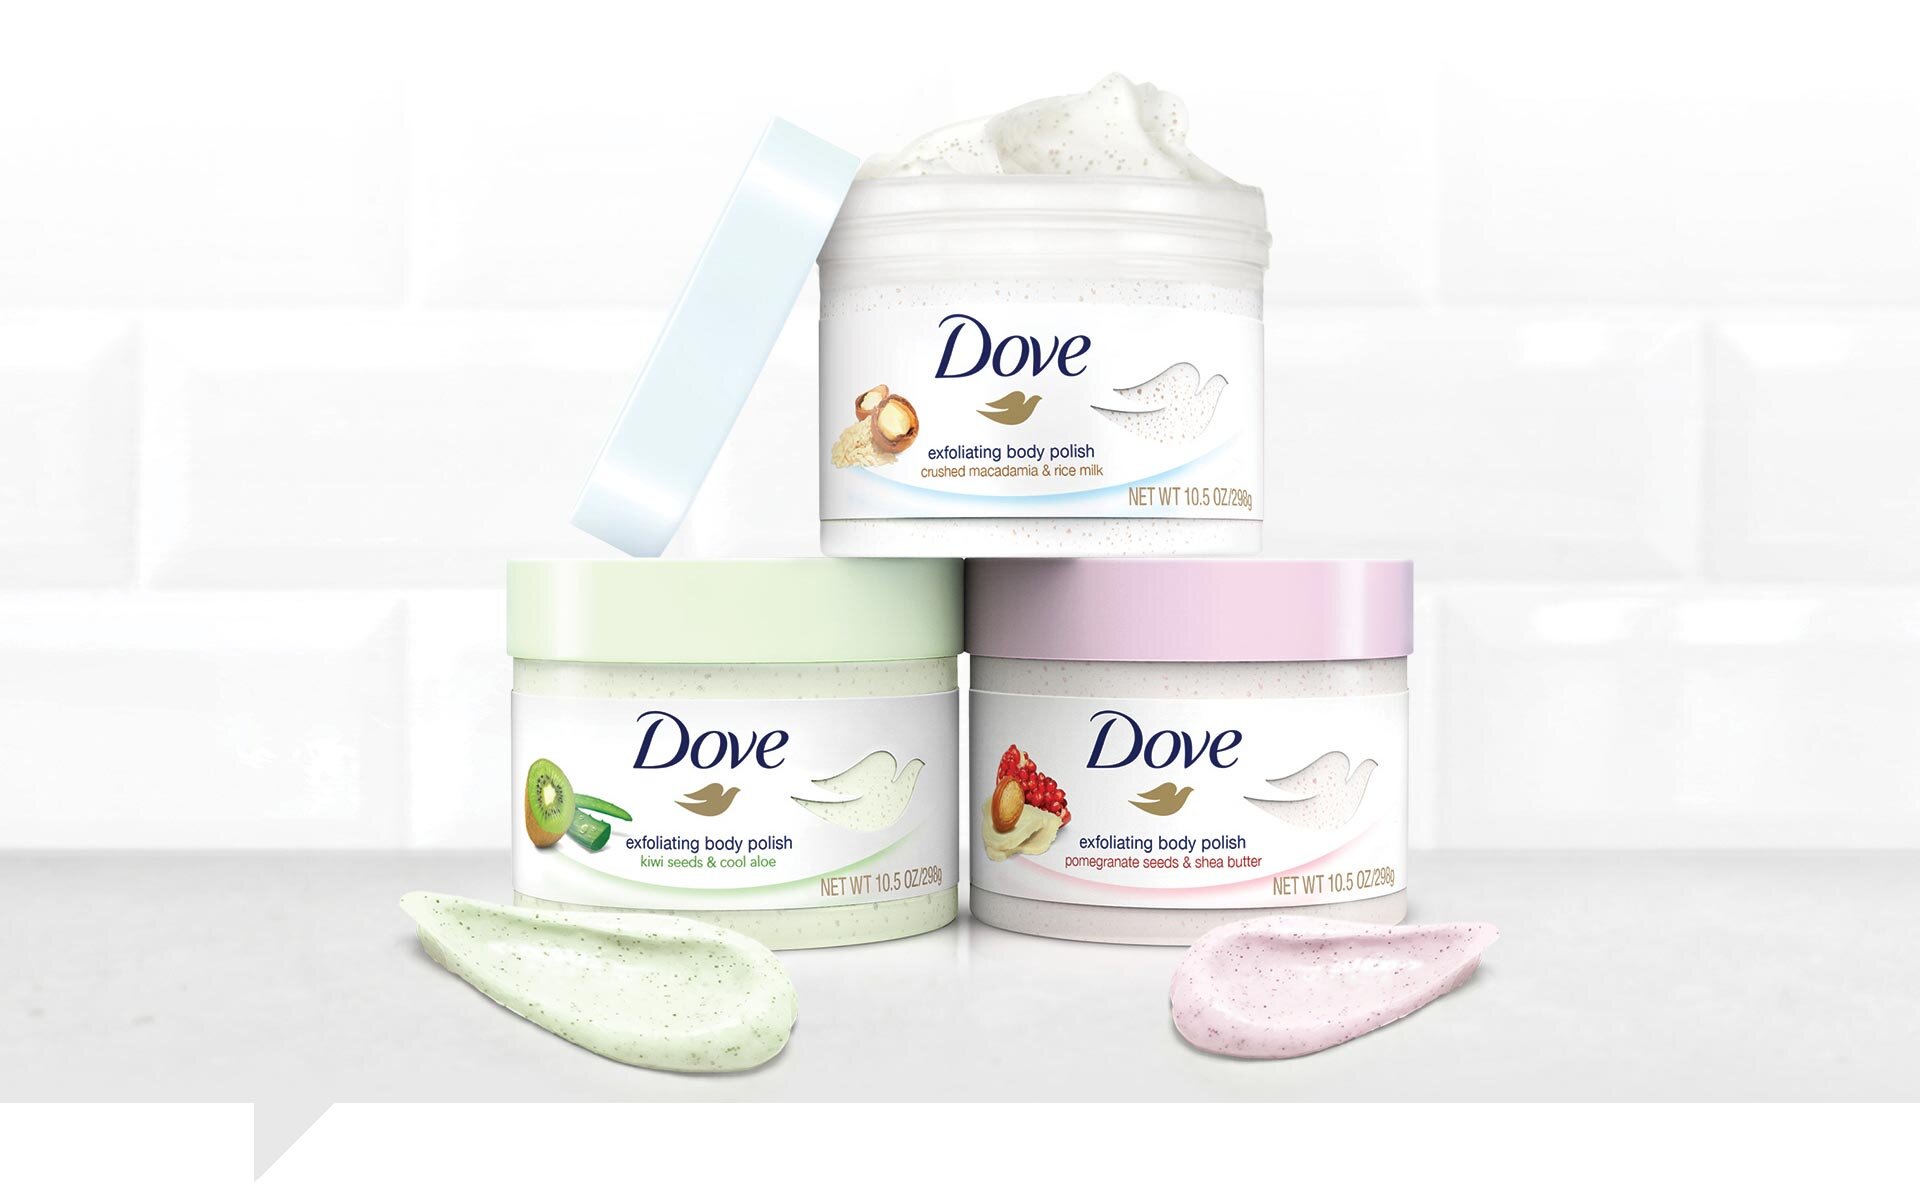  Image of body polish product packaging 